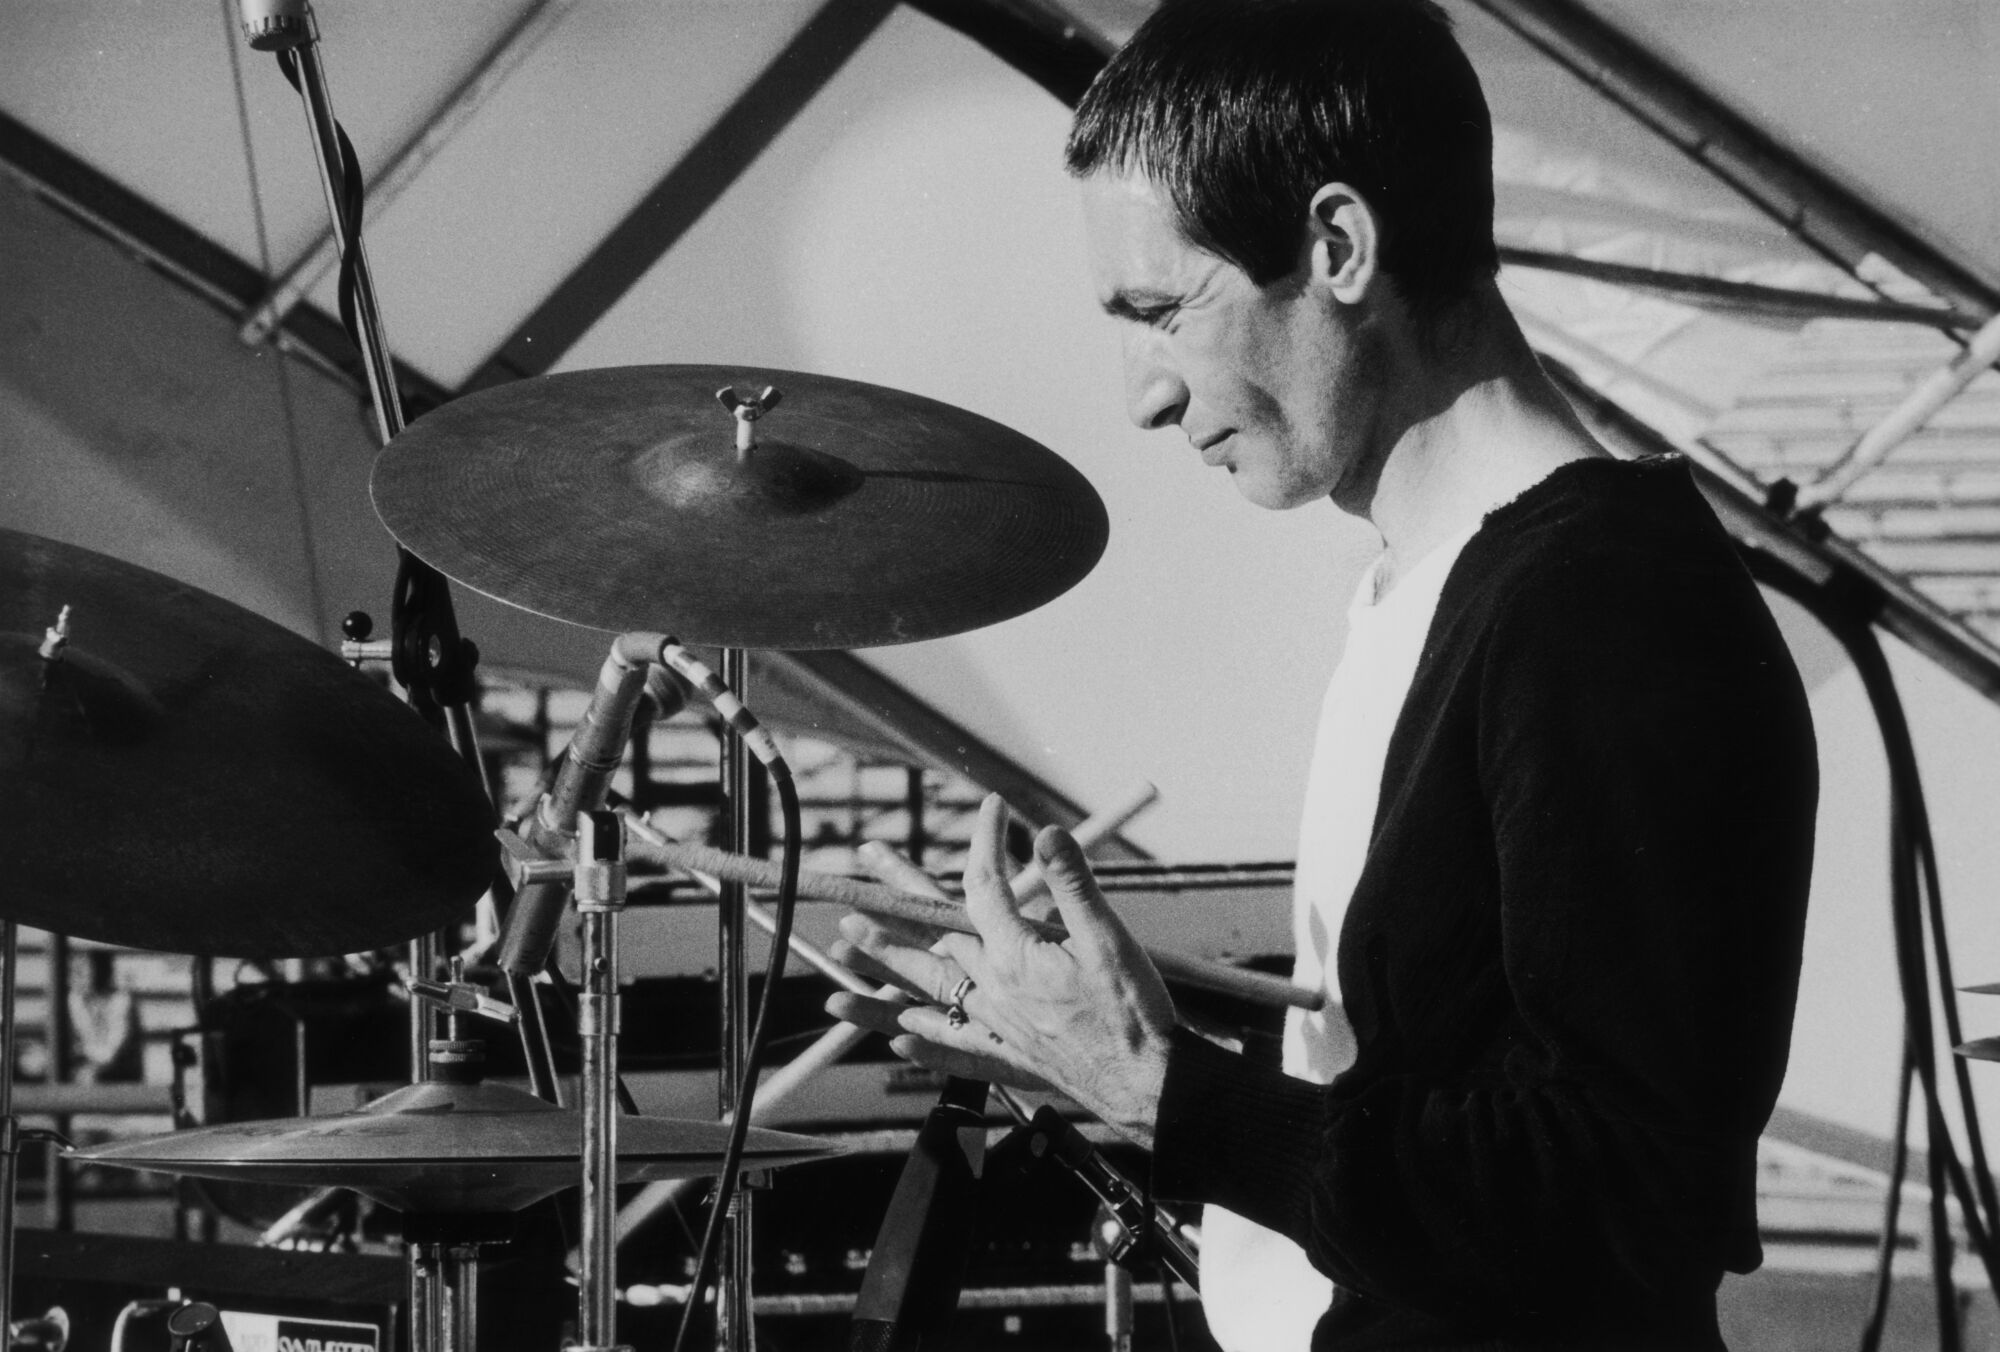 A black-and-white photo of drummer Charlie Watts at his kit in 1975.